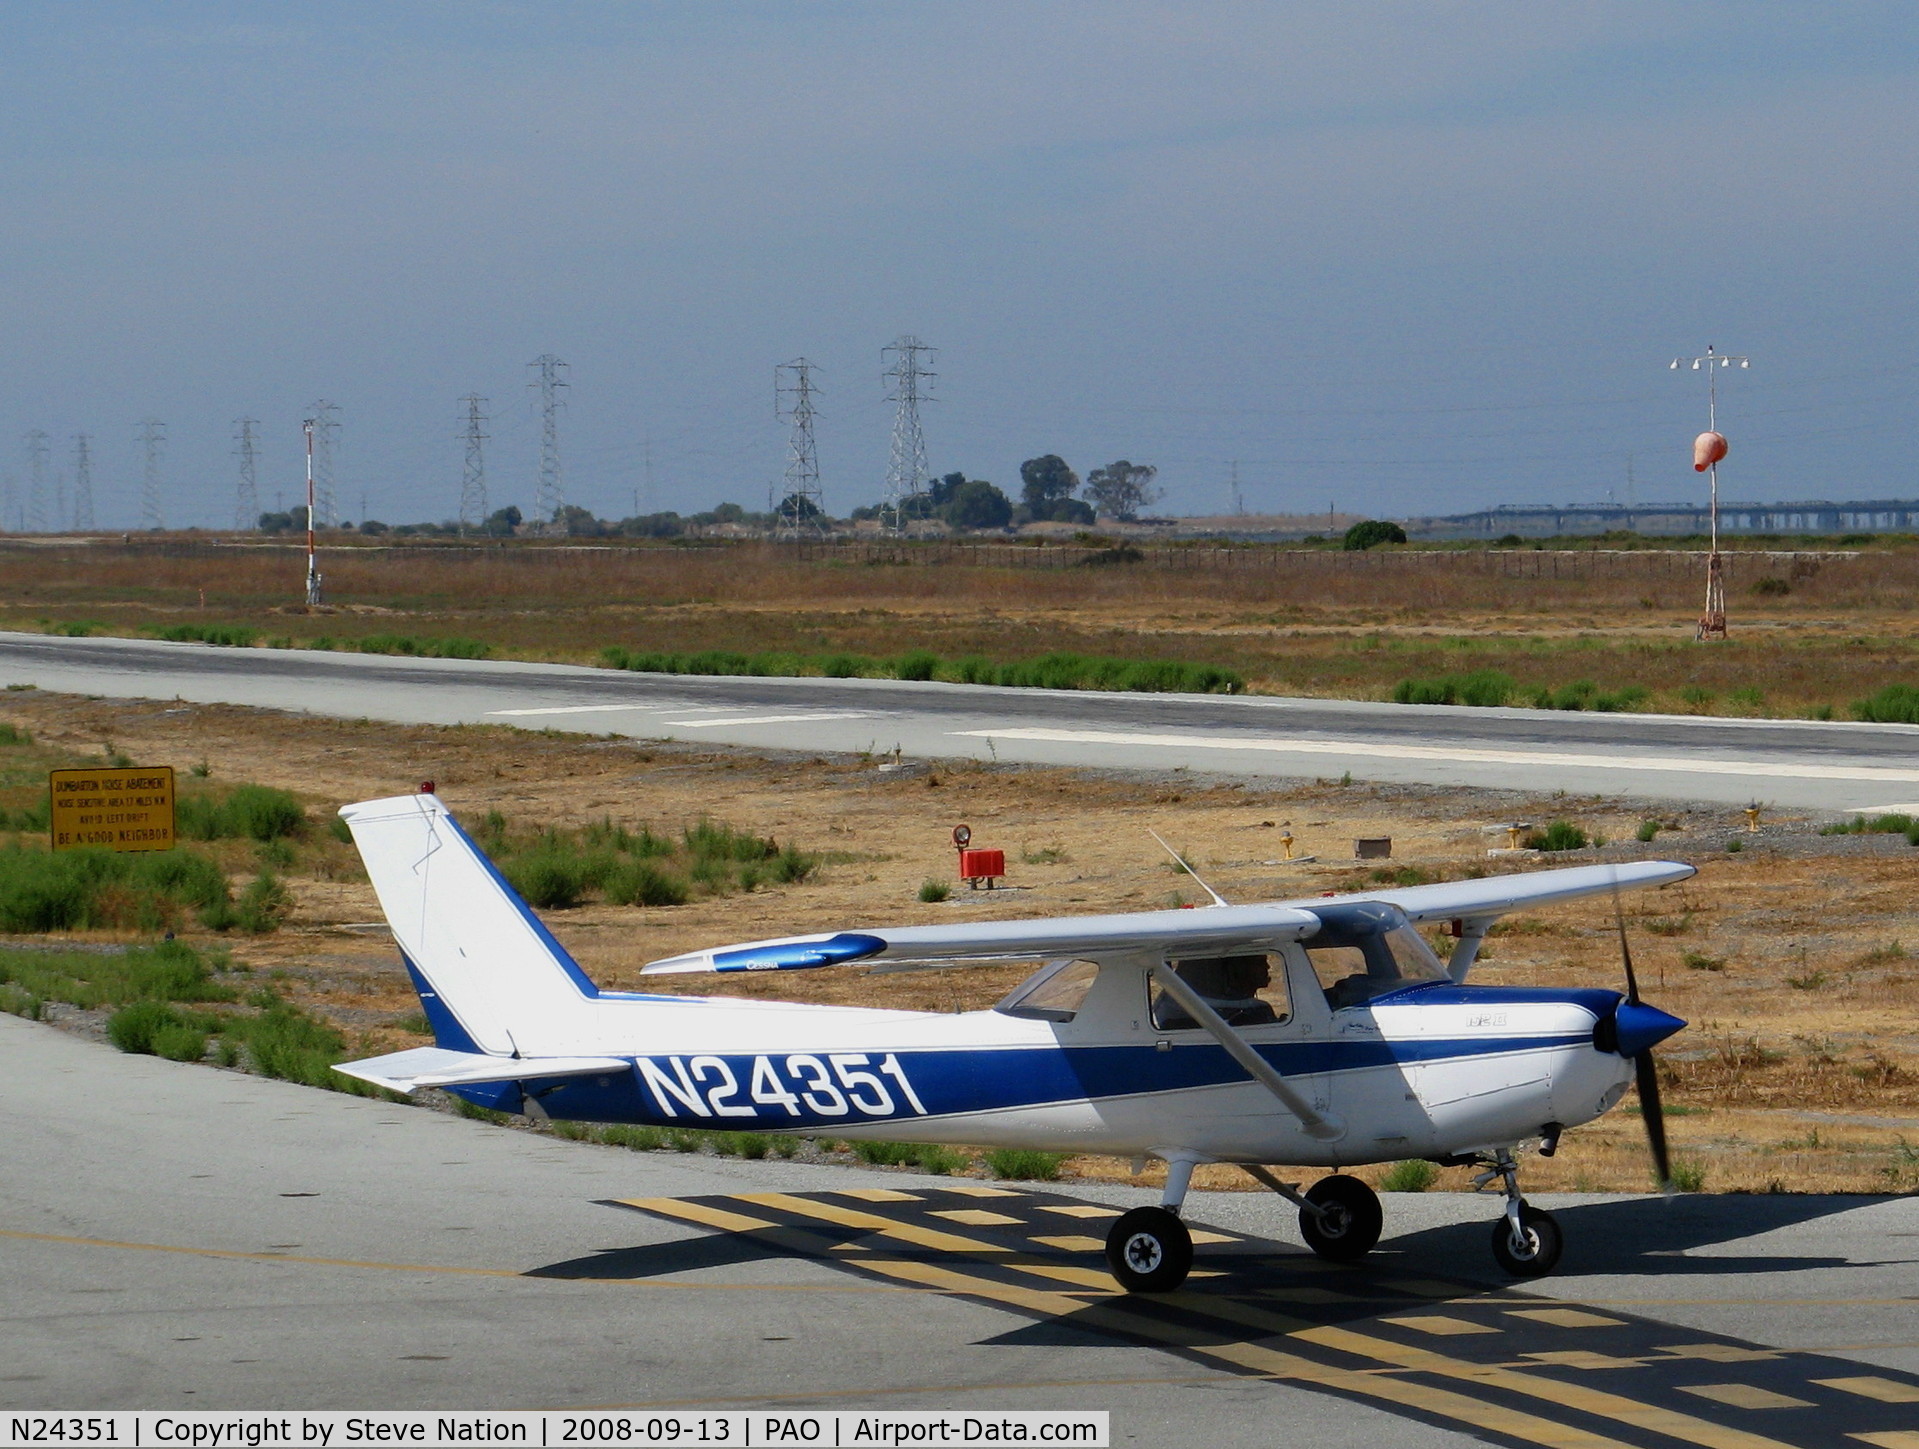 N24351, 1977 Cessna 152 C/N 15280230, 1977 Cessna 152 (no one taxys faster than '351!) @ Palo Alto, CA